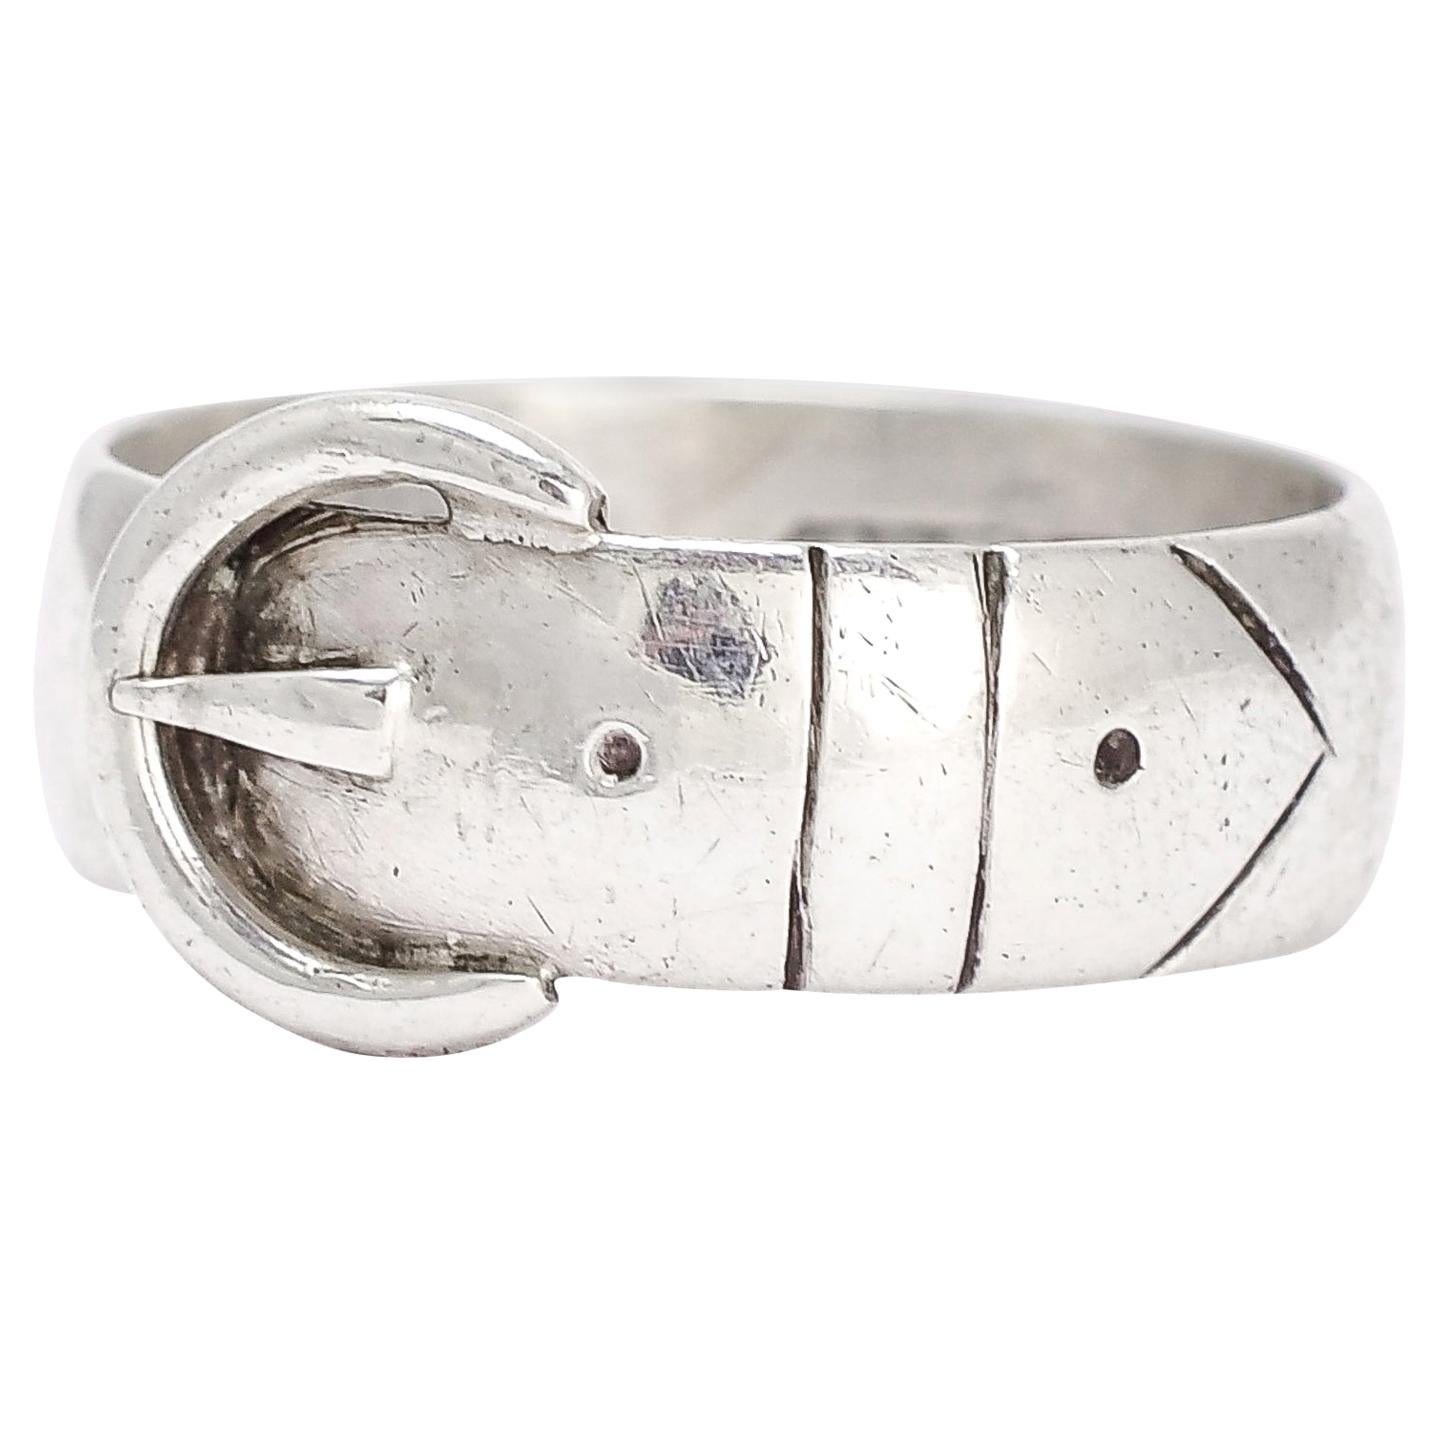 Antique Edwardian Silver Buckle Ring